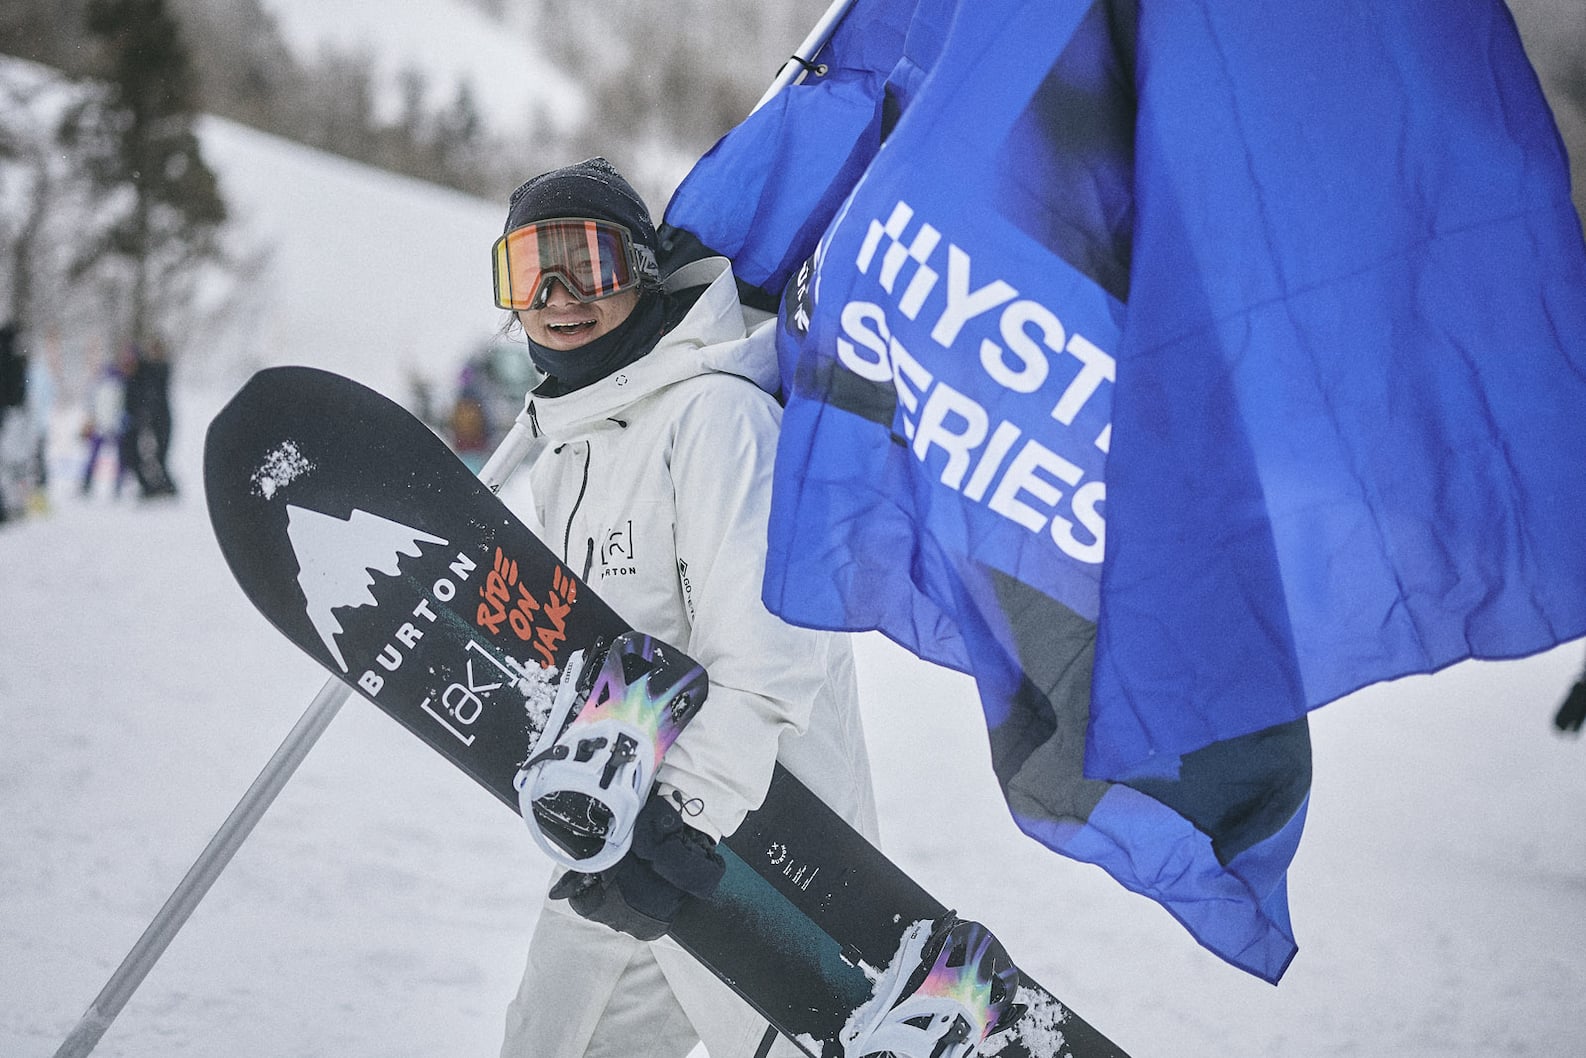 Burton Mystery Series: How to Sign Up & Other FAQs